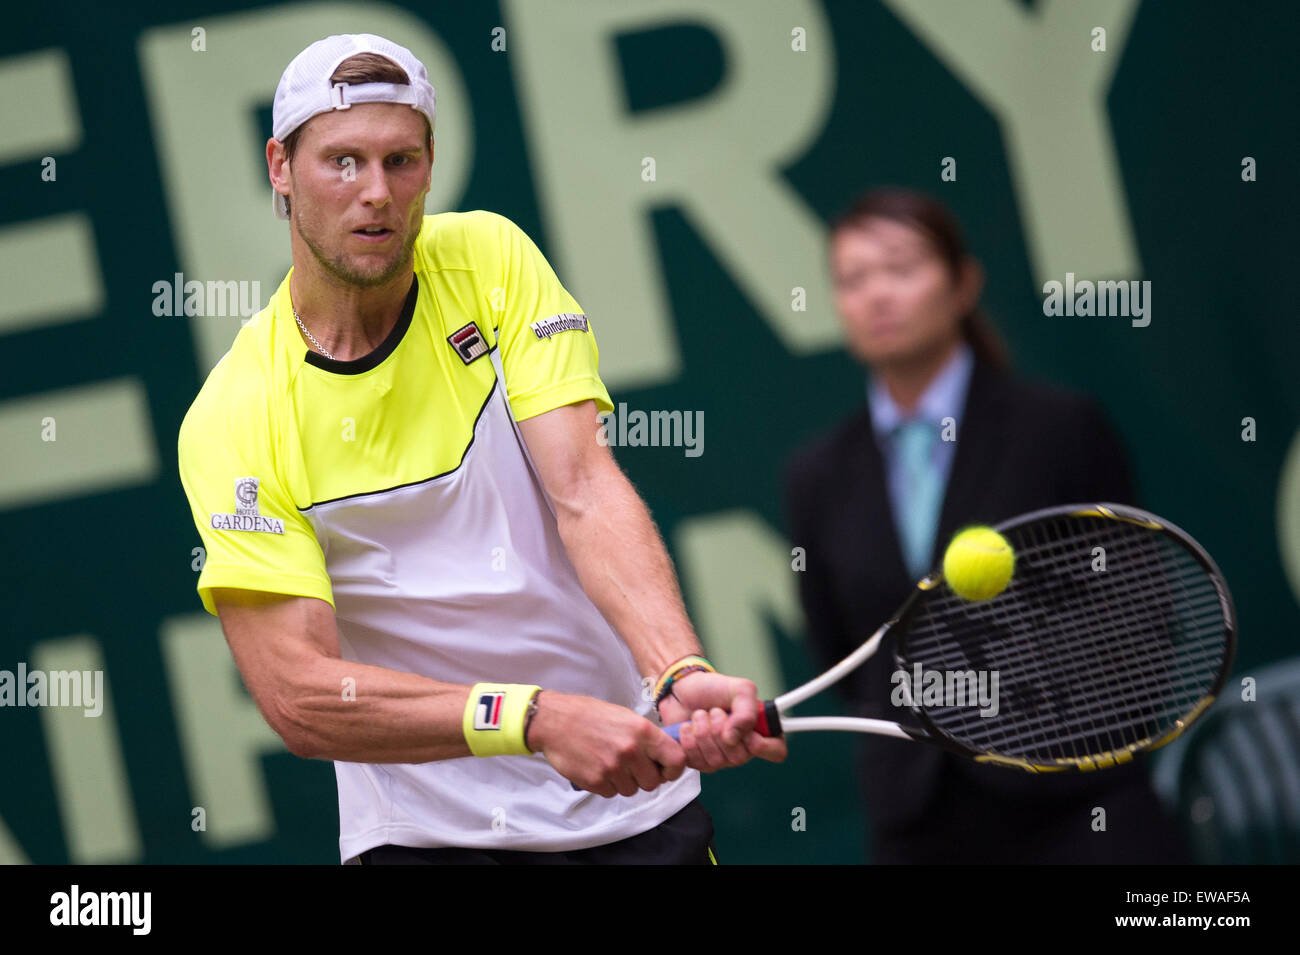 Halle, Germany, 21st June, 2015. Italian tennis player Andreas Seppi in  action at the ATP tournament in Halle, Germany 21 June 2015 in the final  against Roger Federer from Switzerland. Photo: MAJA